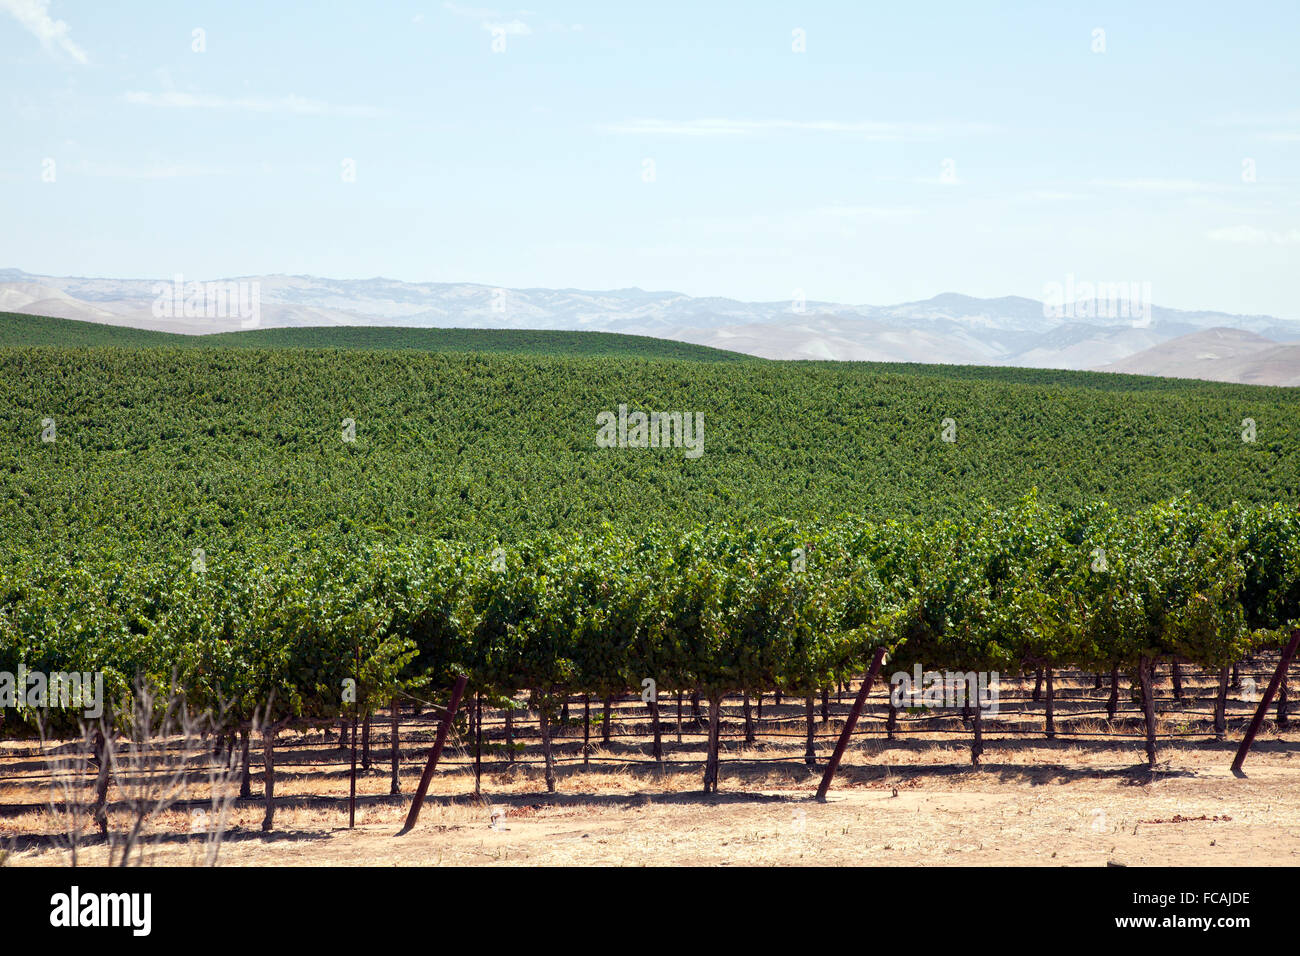 Vineyards along US 101 in Central California, between Paso Robles and Salinas. Stock Photo